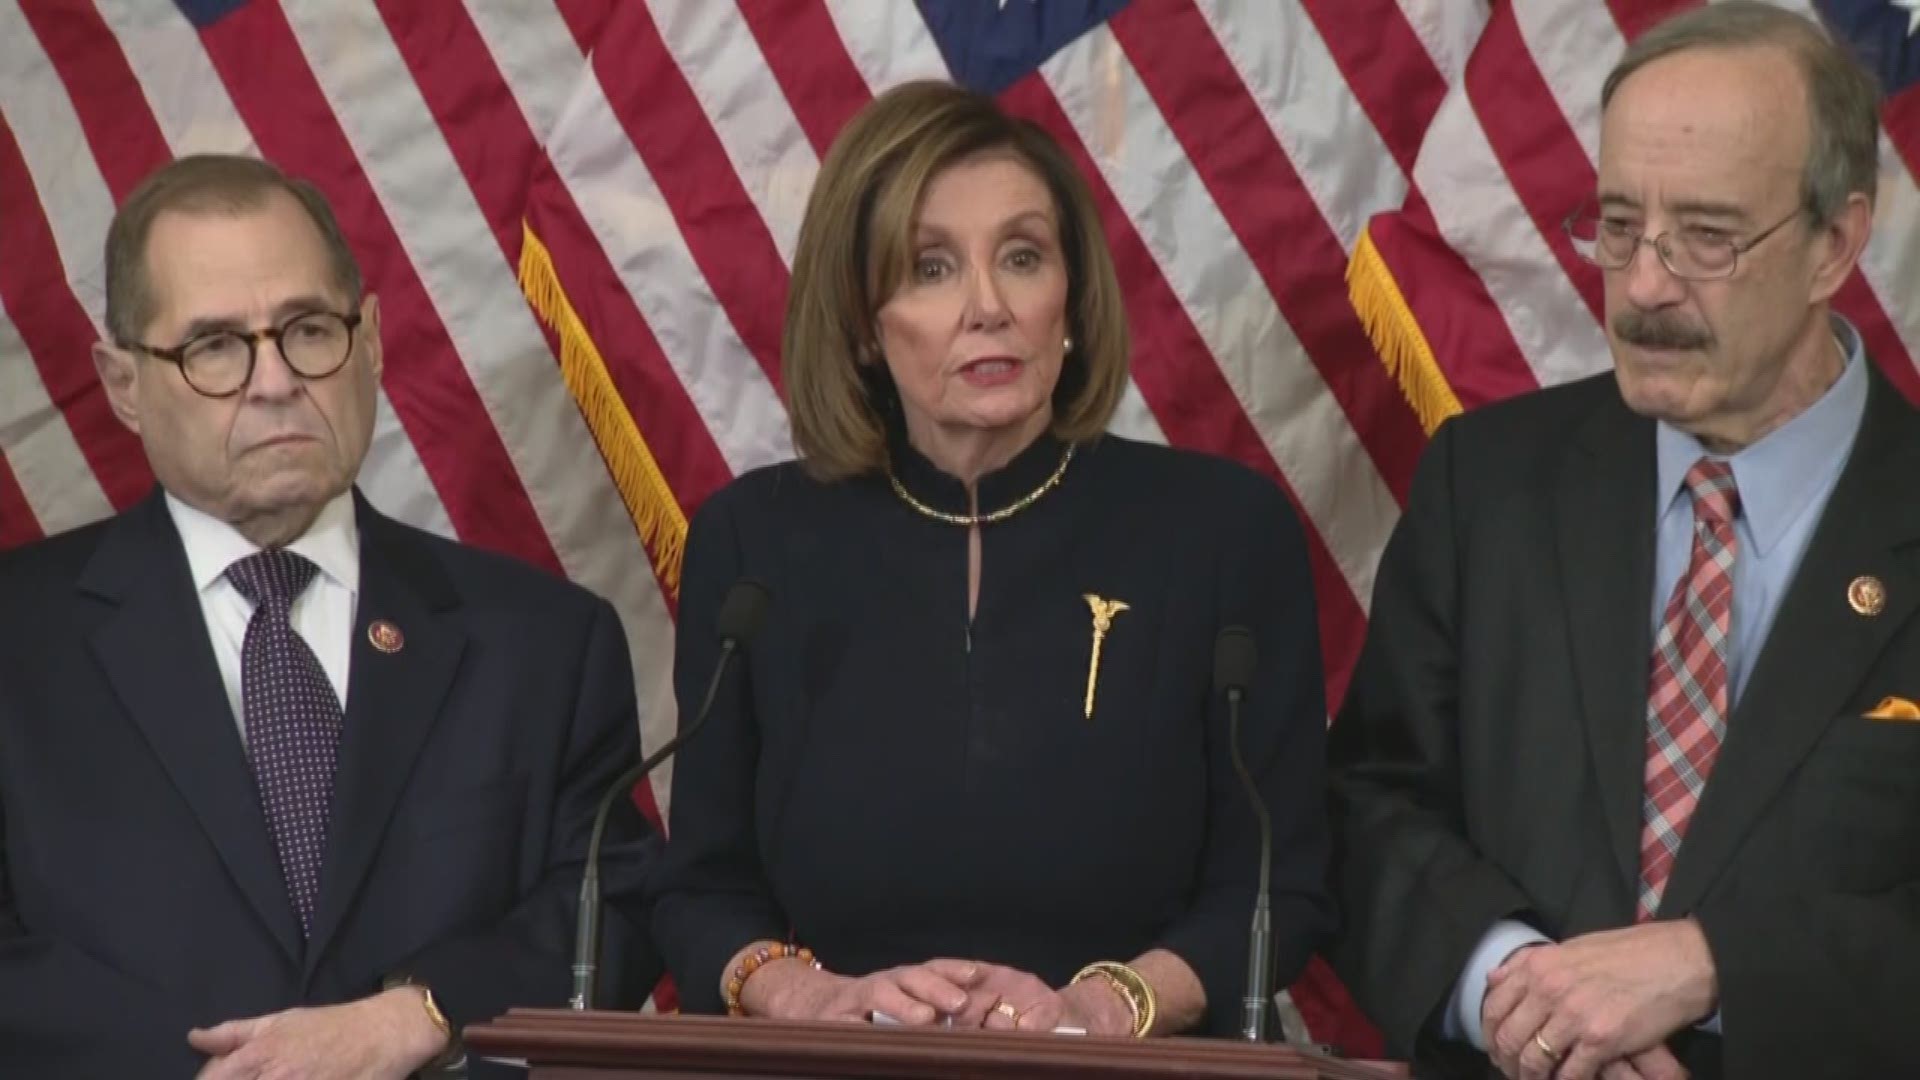 Speaker of the House Nancy Pelosi said she couldn't be prouder or more inspired after lawmakers voted to impeach President Trump.